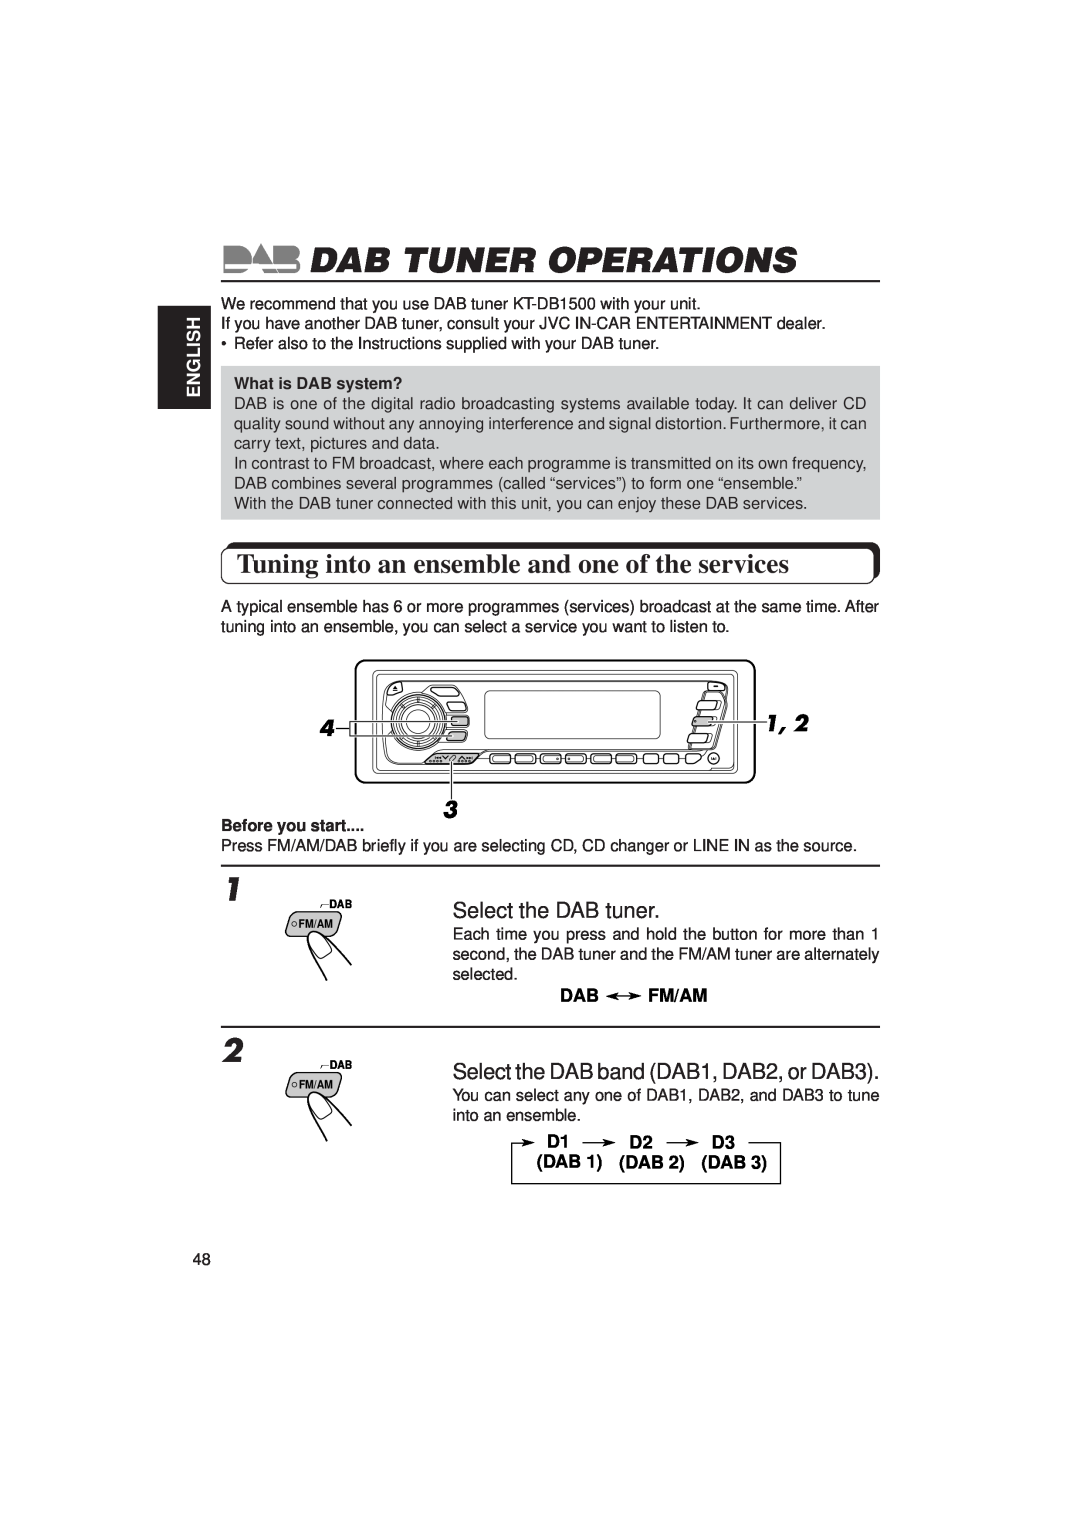 JVC KD-MX2900R manual Dab Tuner Operations, Tuning into an ensemble and one of the services, Select the DAB tuner, English 